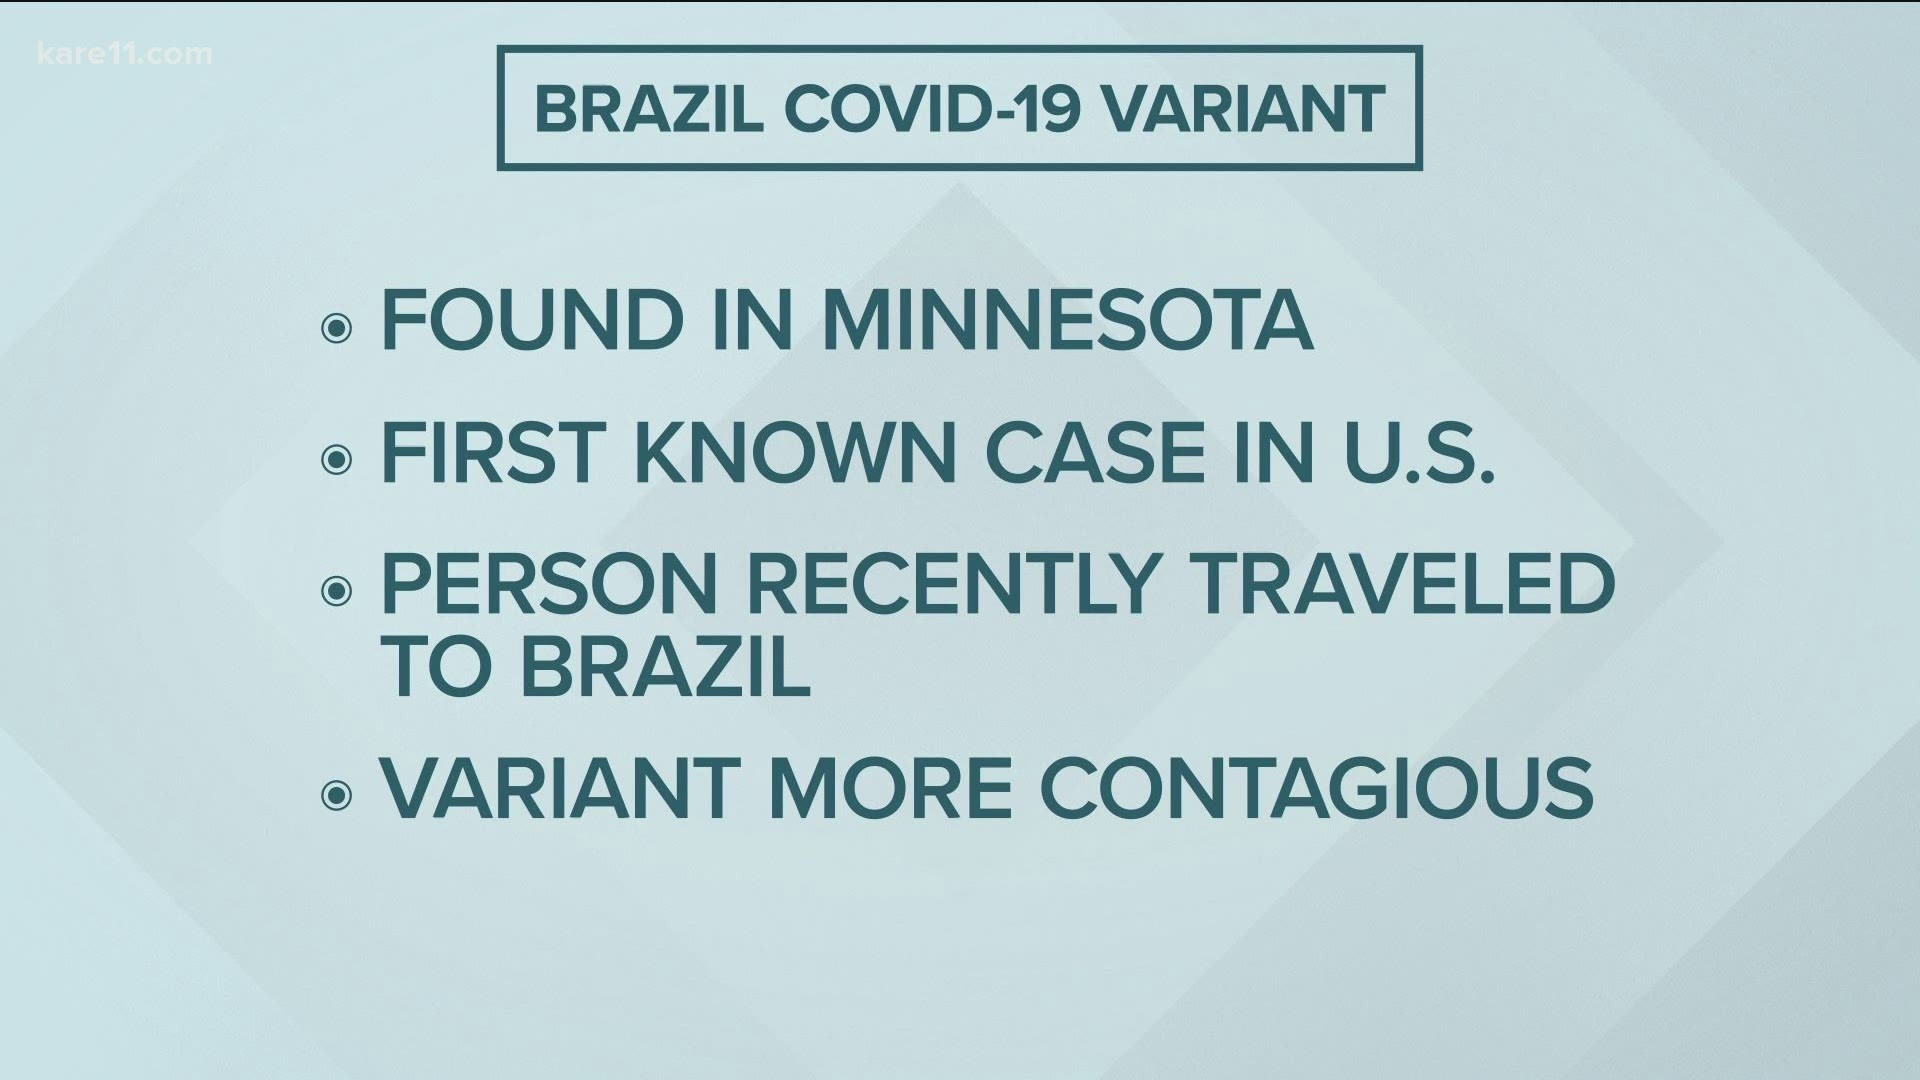 The Minnesota Department of Health reports the patient recently returned from travel to Brazil.